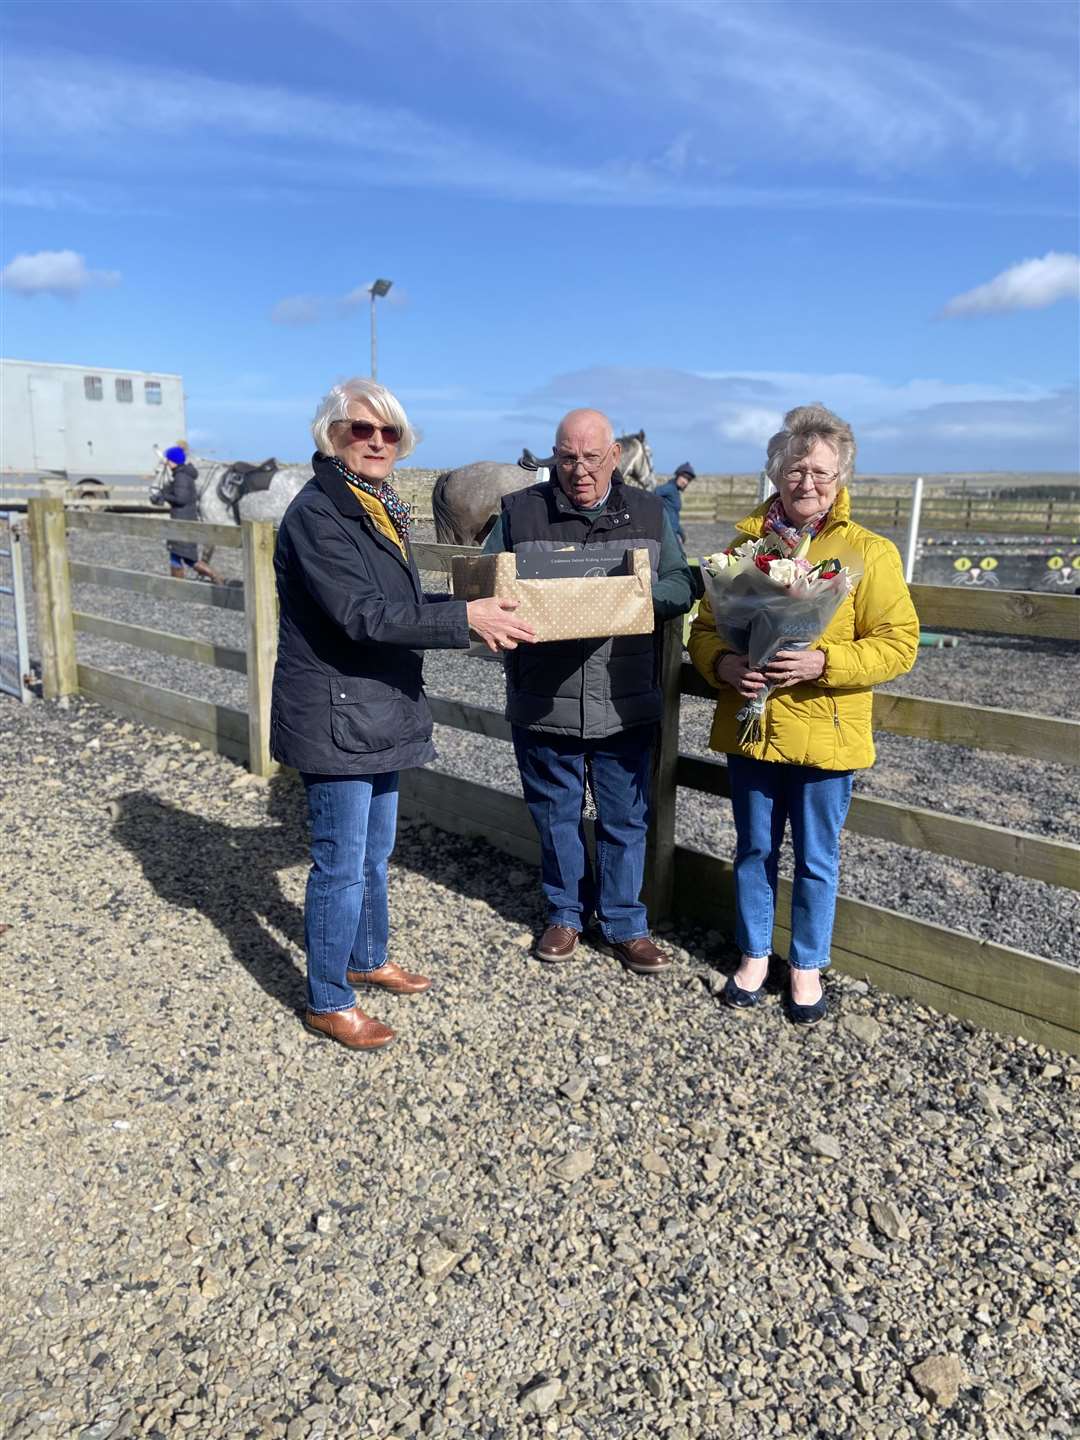 Caithness Indoor School Association treasurer Dorothy Henderson presented Mr Christie Cameron with a slate clock and a meal voucher on the occasion of his retirement, while his wife Isobel Cameron (right) received flowers.